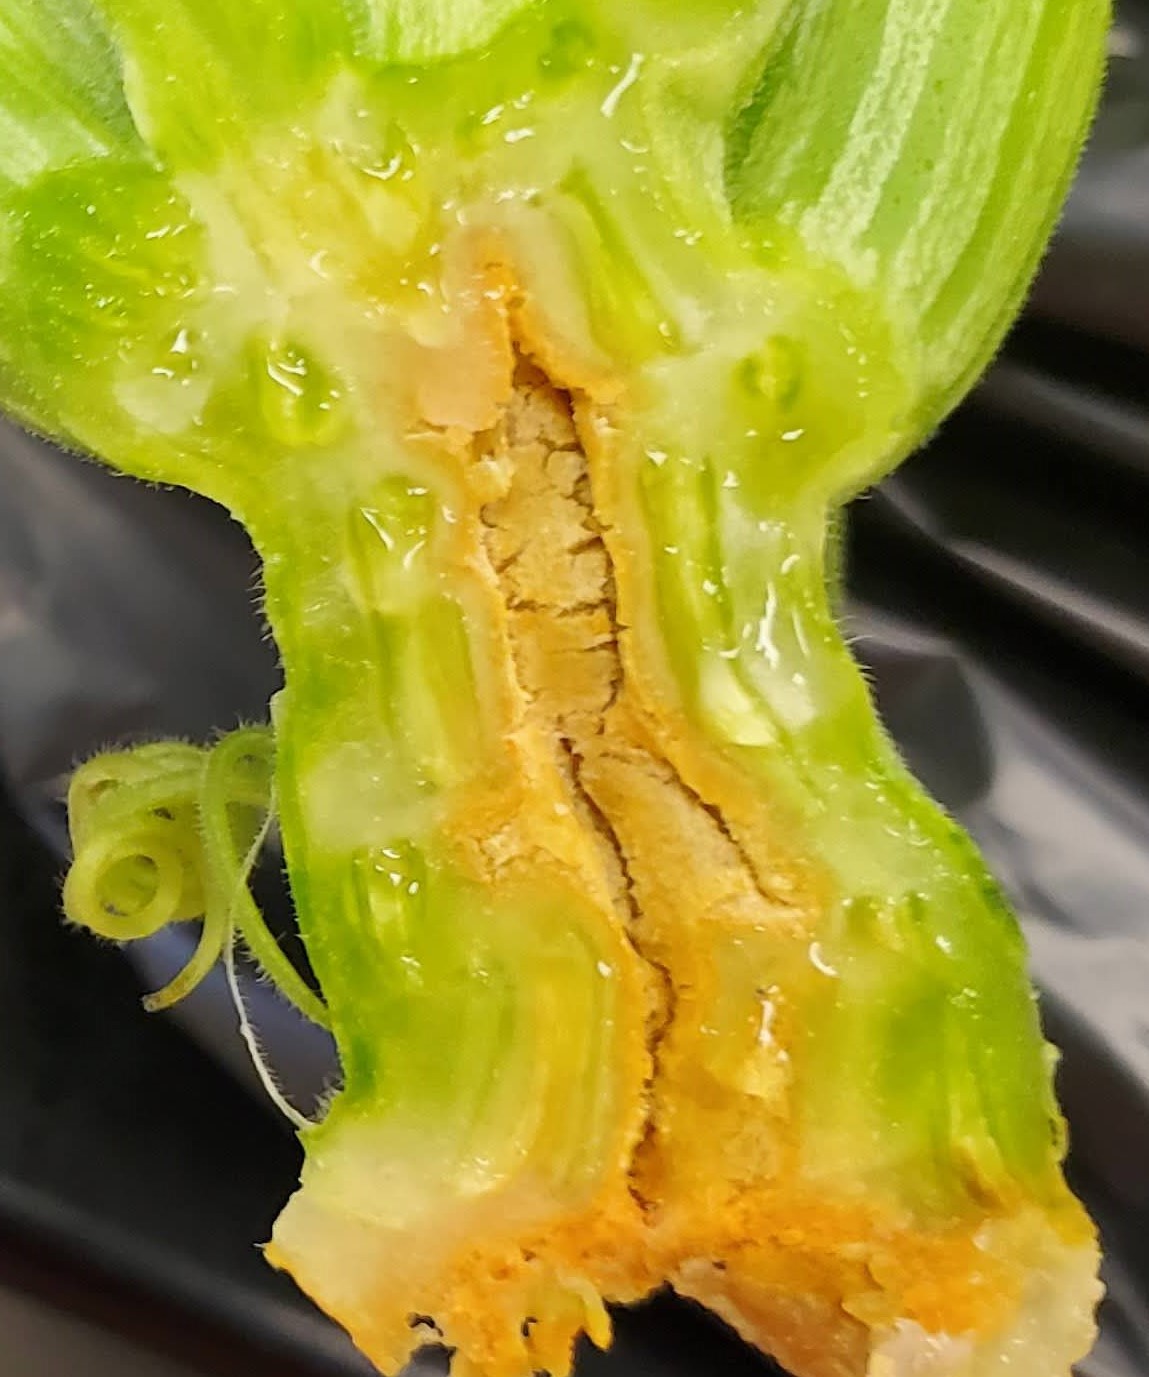 Symptoms of bacterial canker infected stem